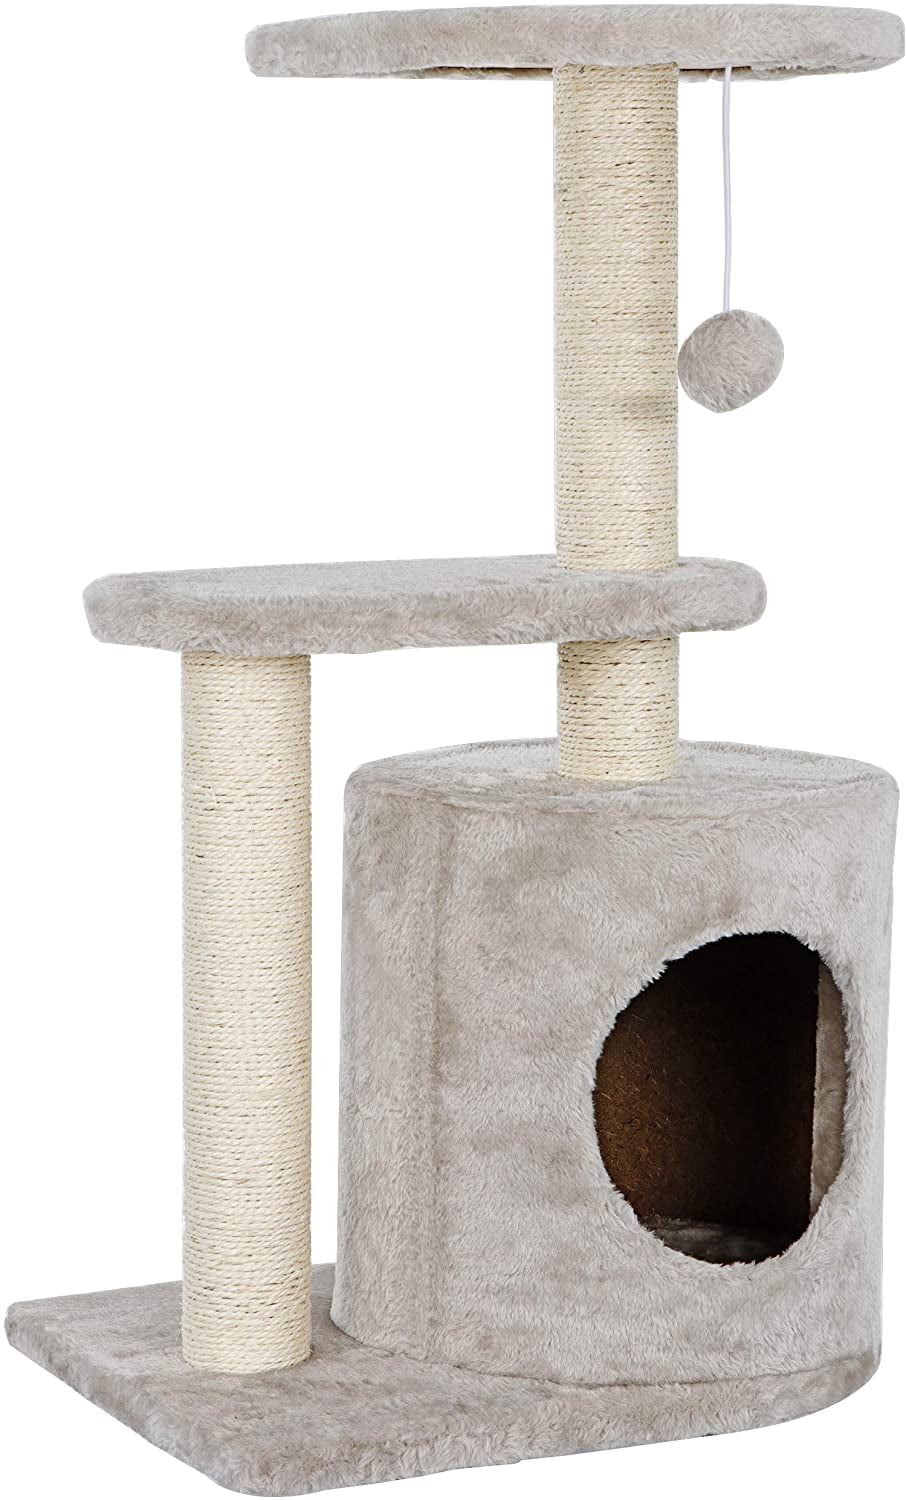 36" Cat Tree Bed Furniture Scratching Tower Post Condo Kitten Pet House Beige 